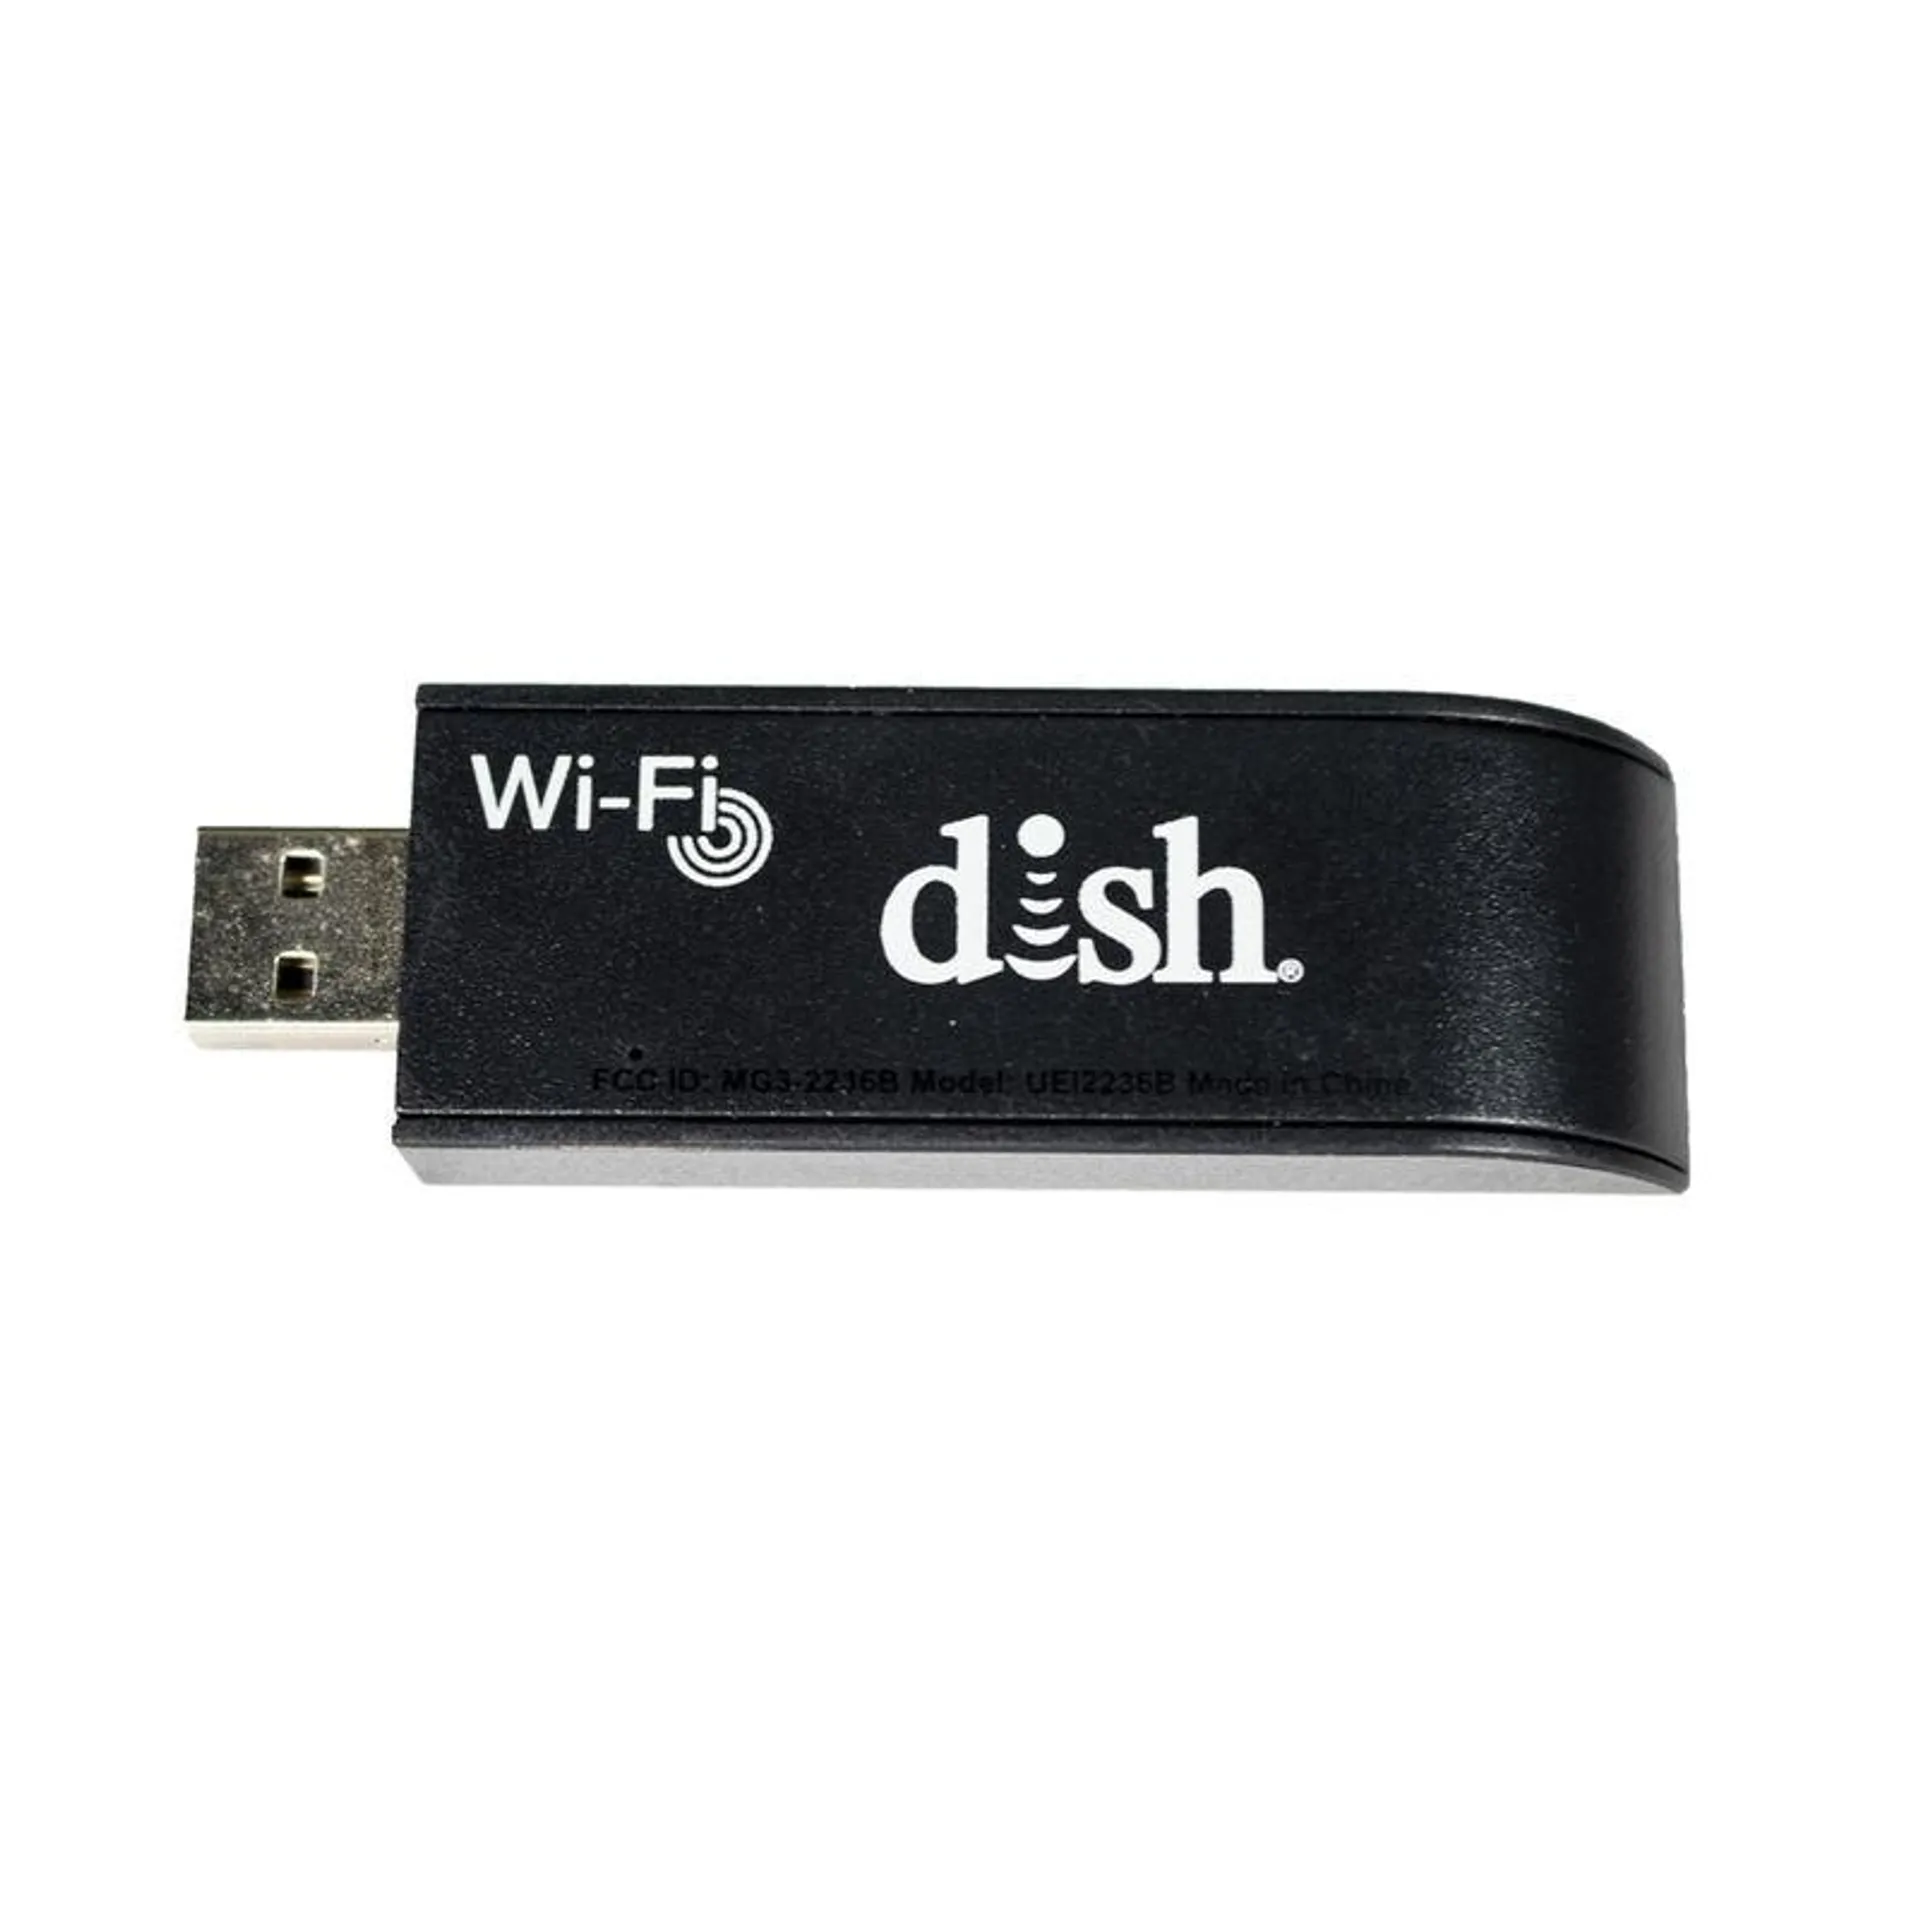 Wally Dish Receiver, Wi-Fi Adapter